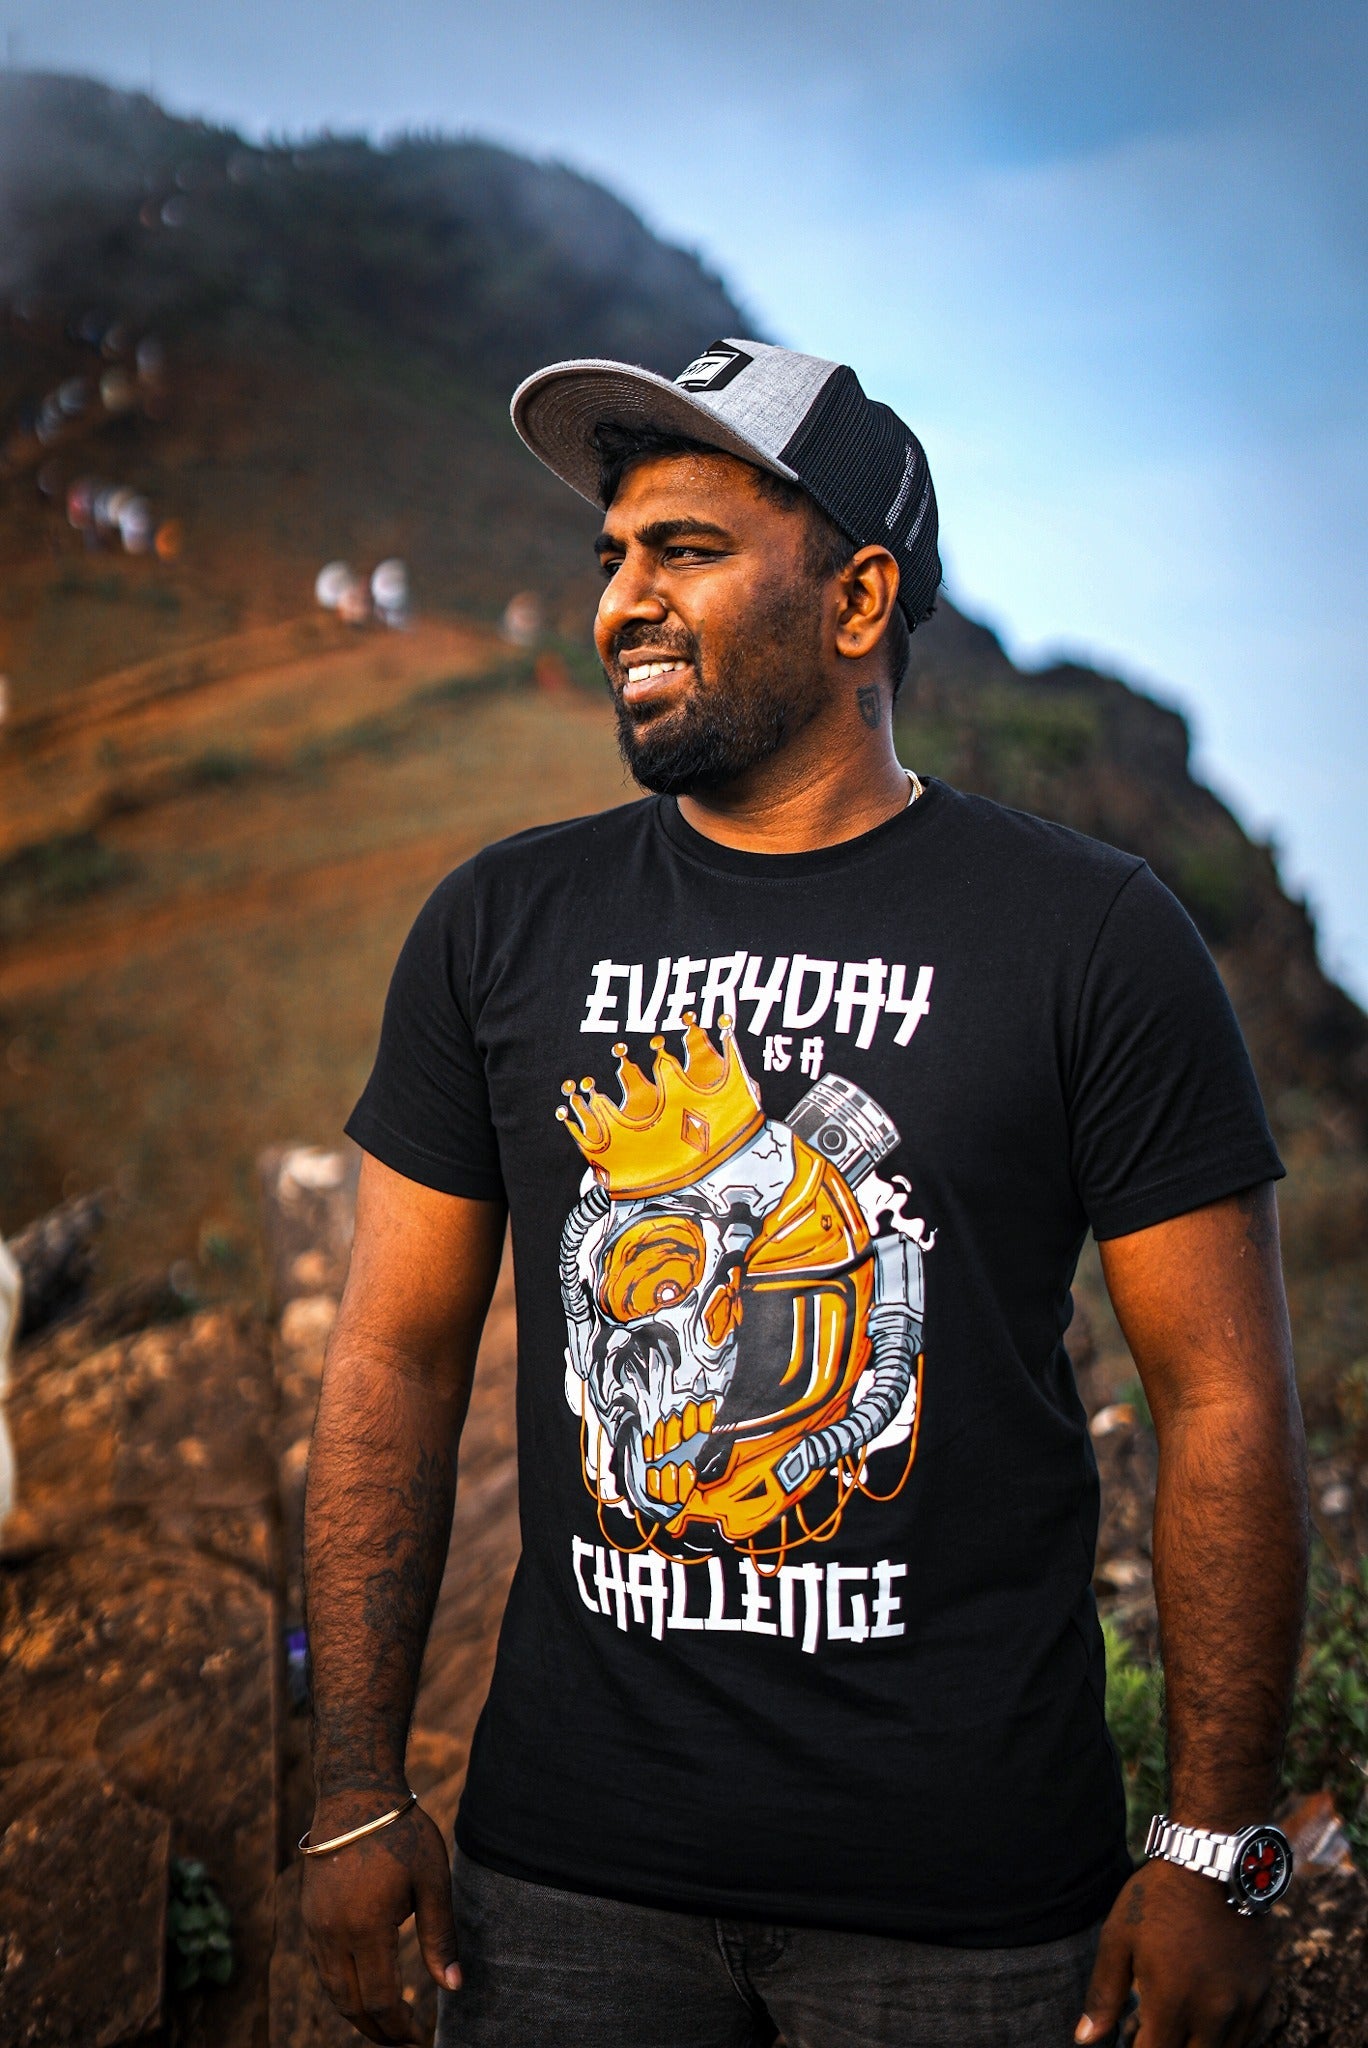 Everyday is a Challenge Tshirt